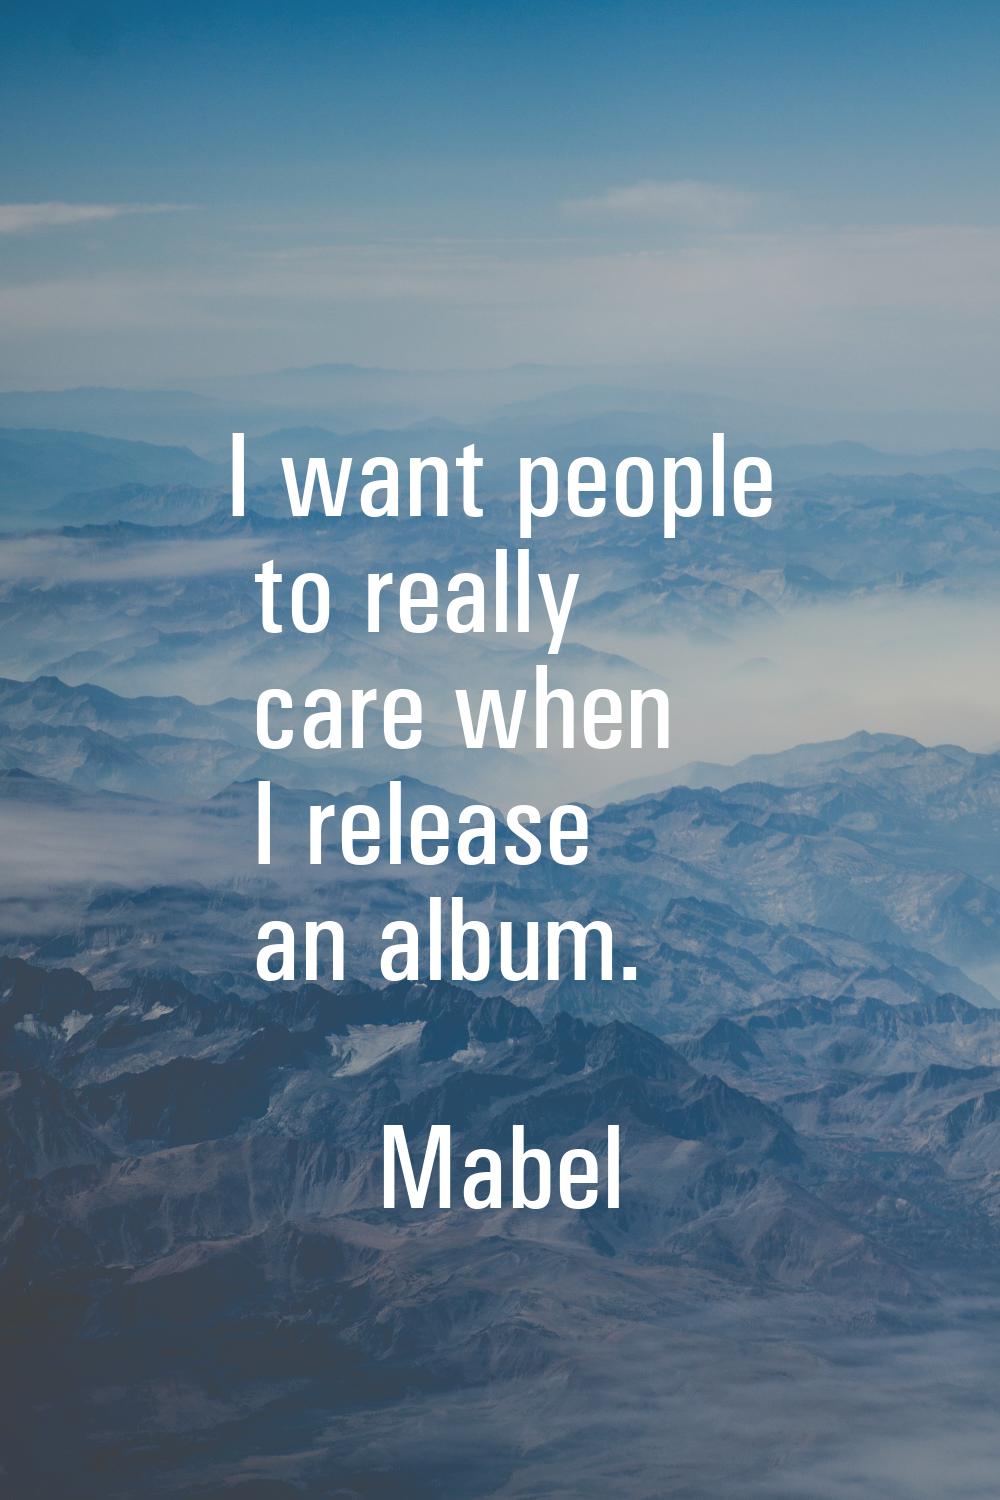 I want people to really care when I release an album.